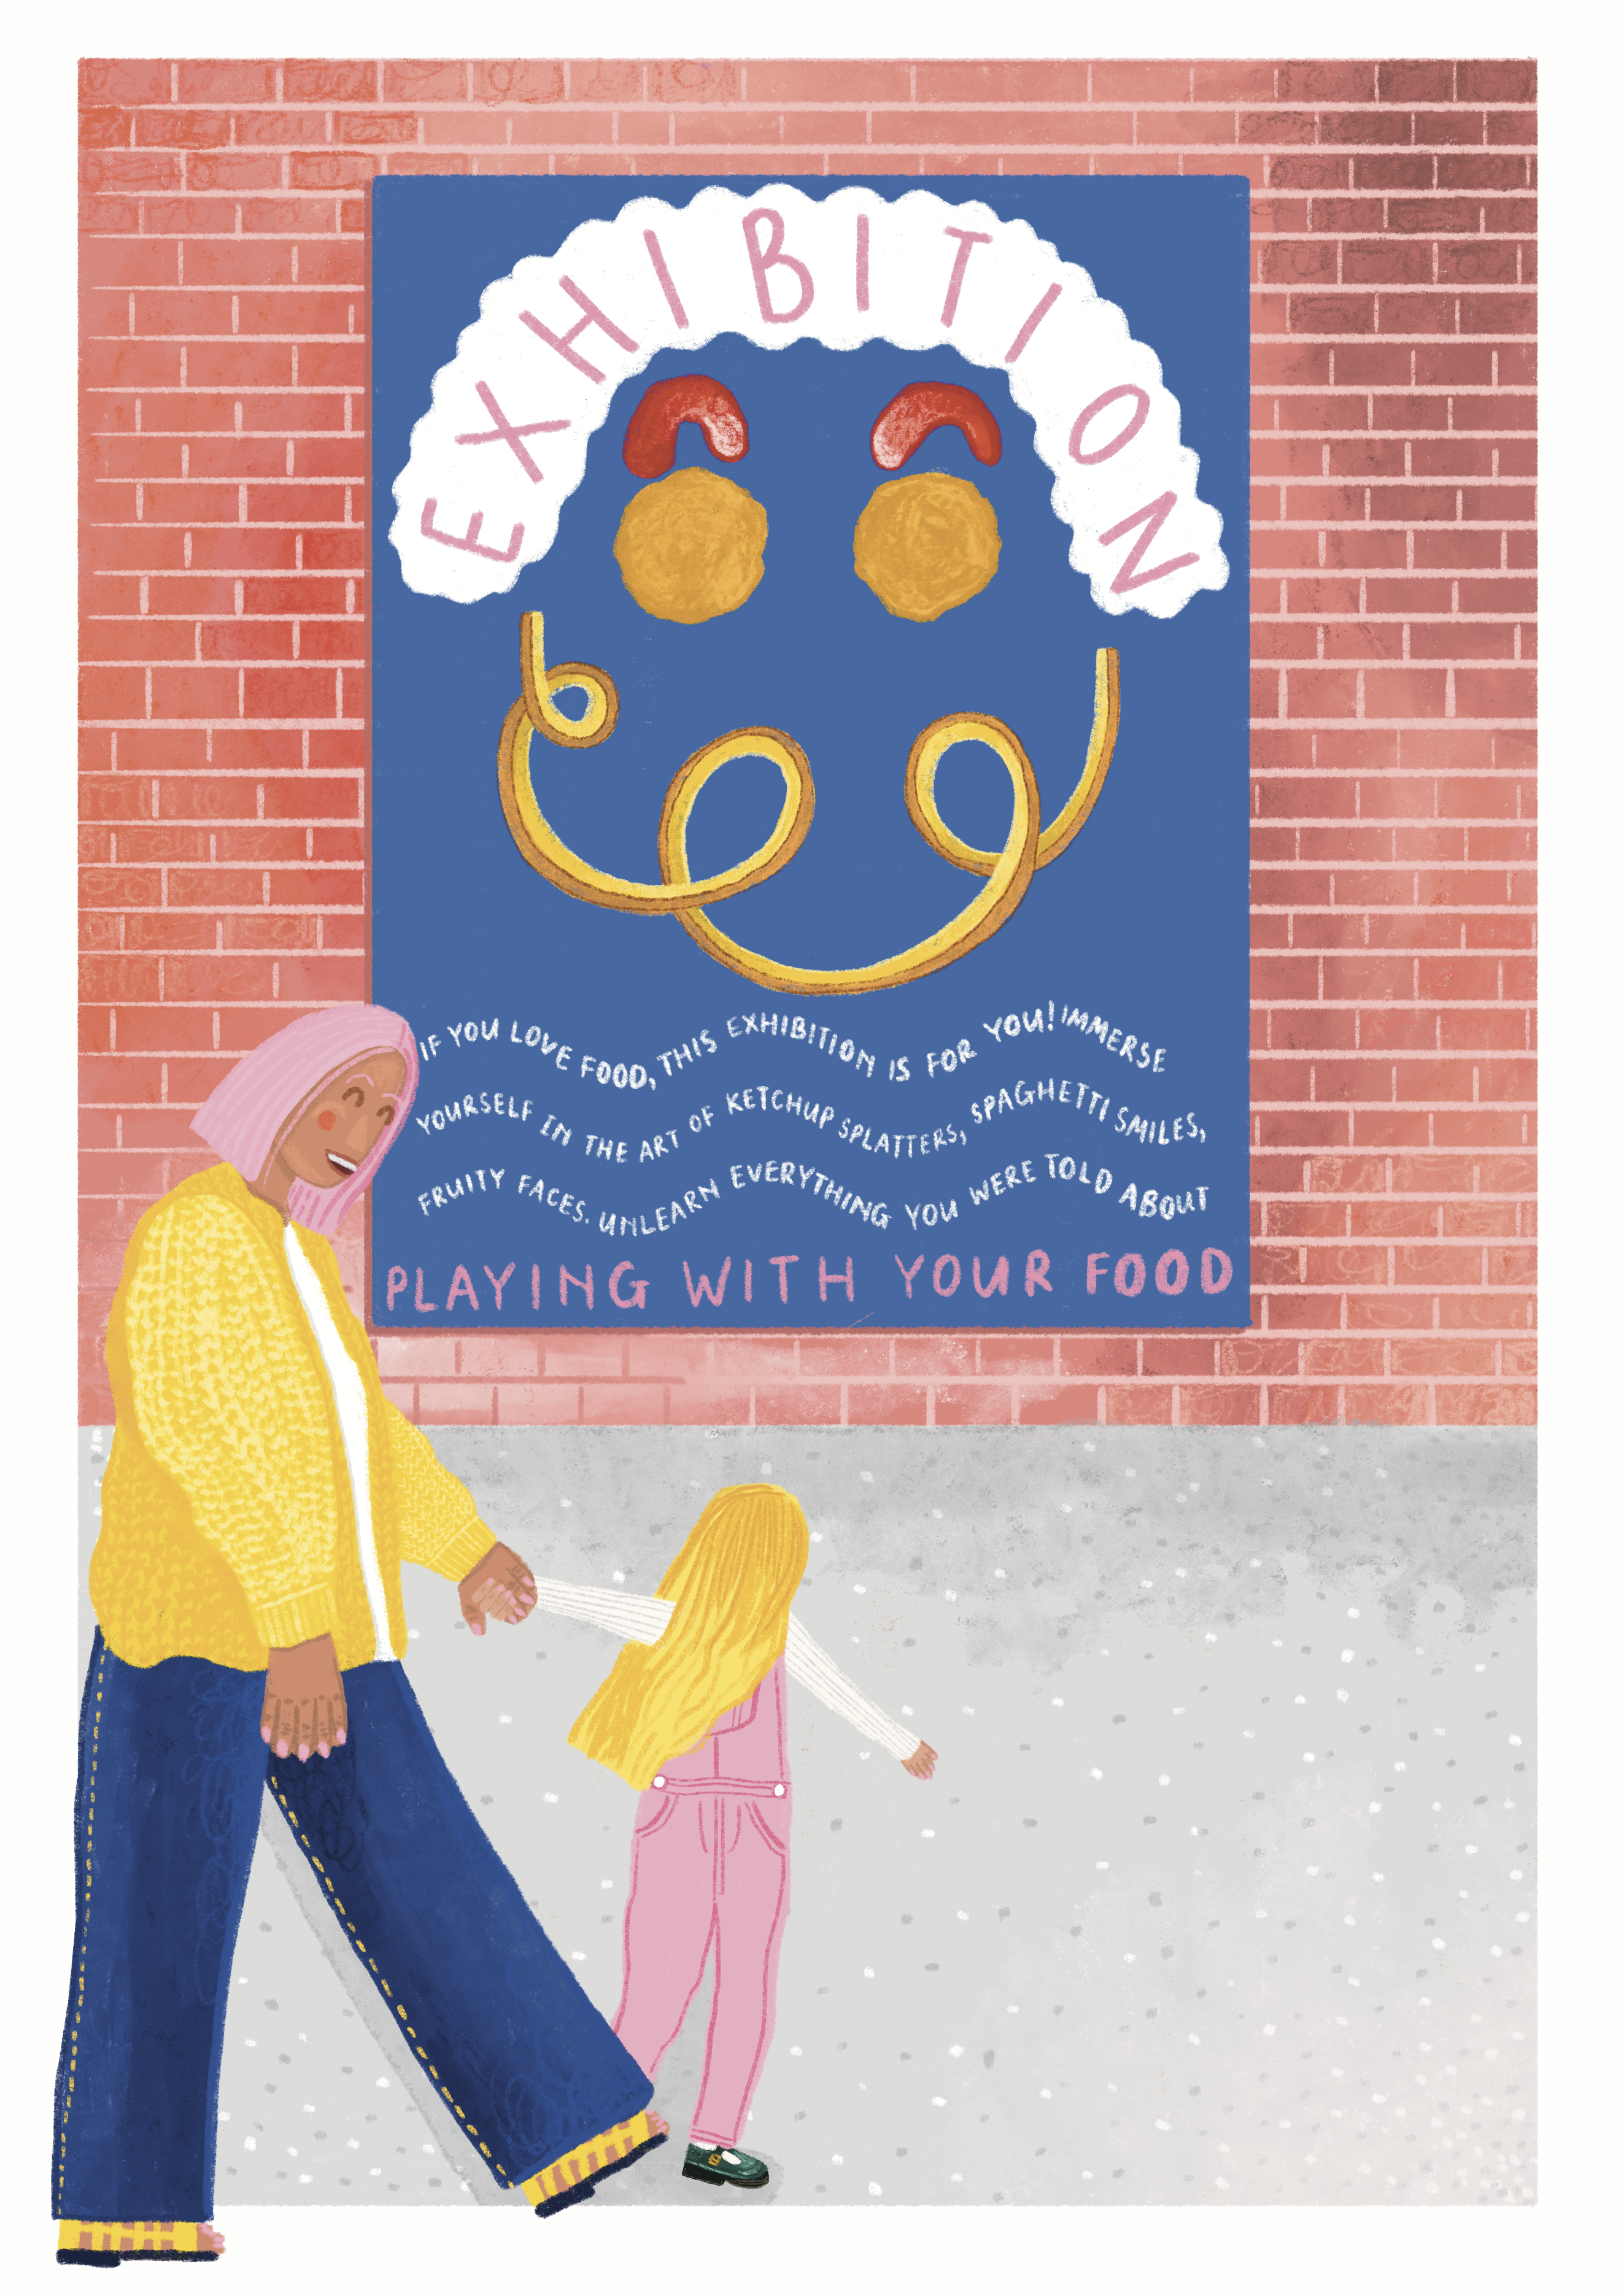 An illustration done by Hope Bullen with a brick wall showcasing an exhibition poster of a gallery open evening. It showcases a face made up of chicken nugget eyes, tomato ketchup eyebrows and a curly fry mouth. A young girl is pulling her mother along the pavement to imply she wants to go.